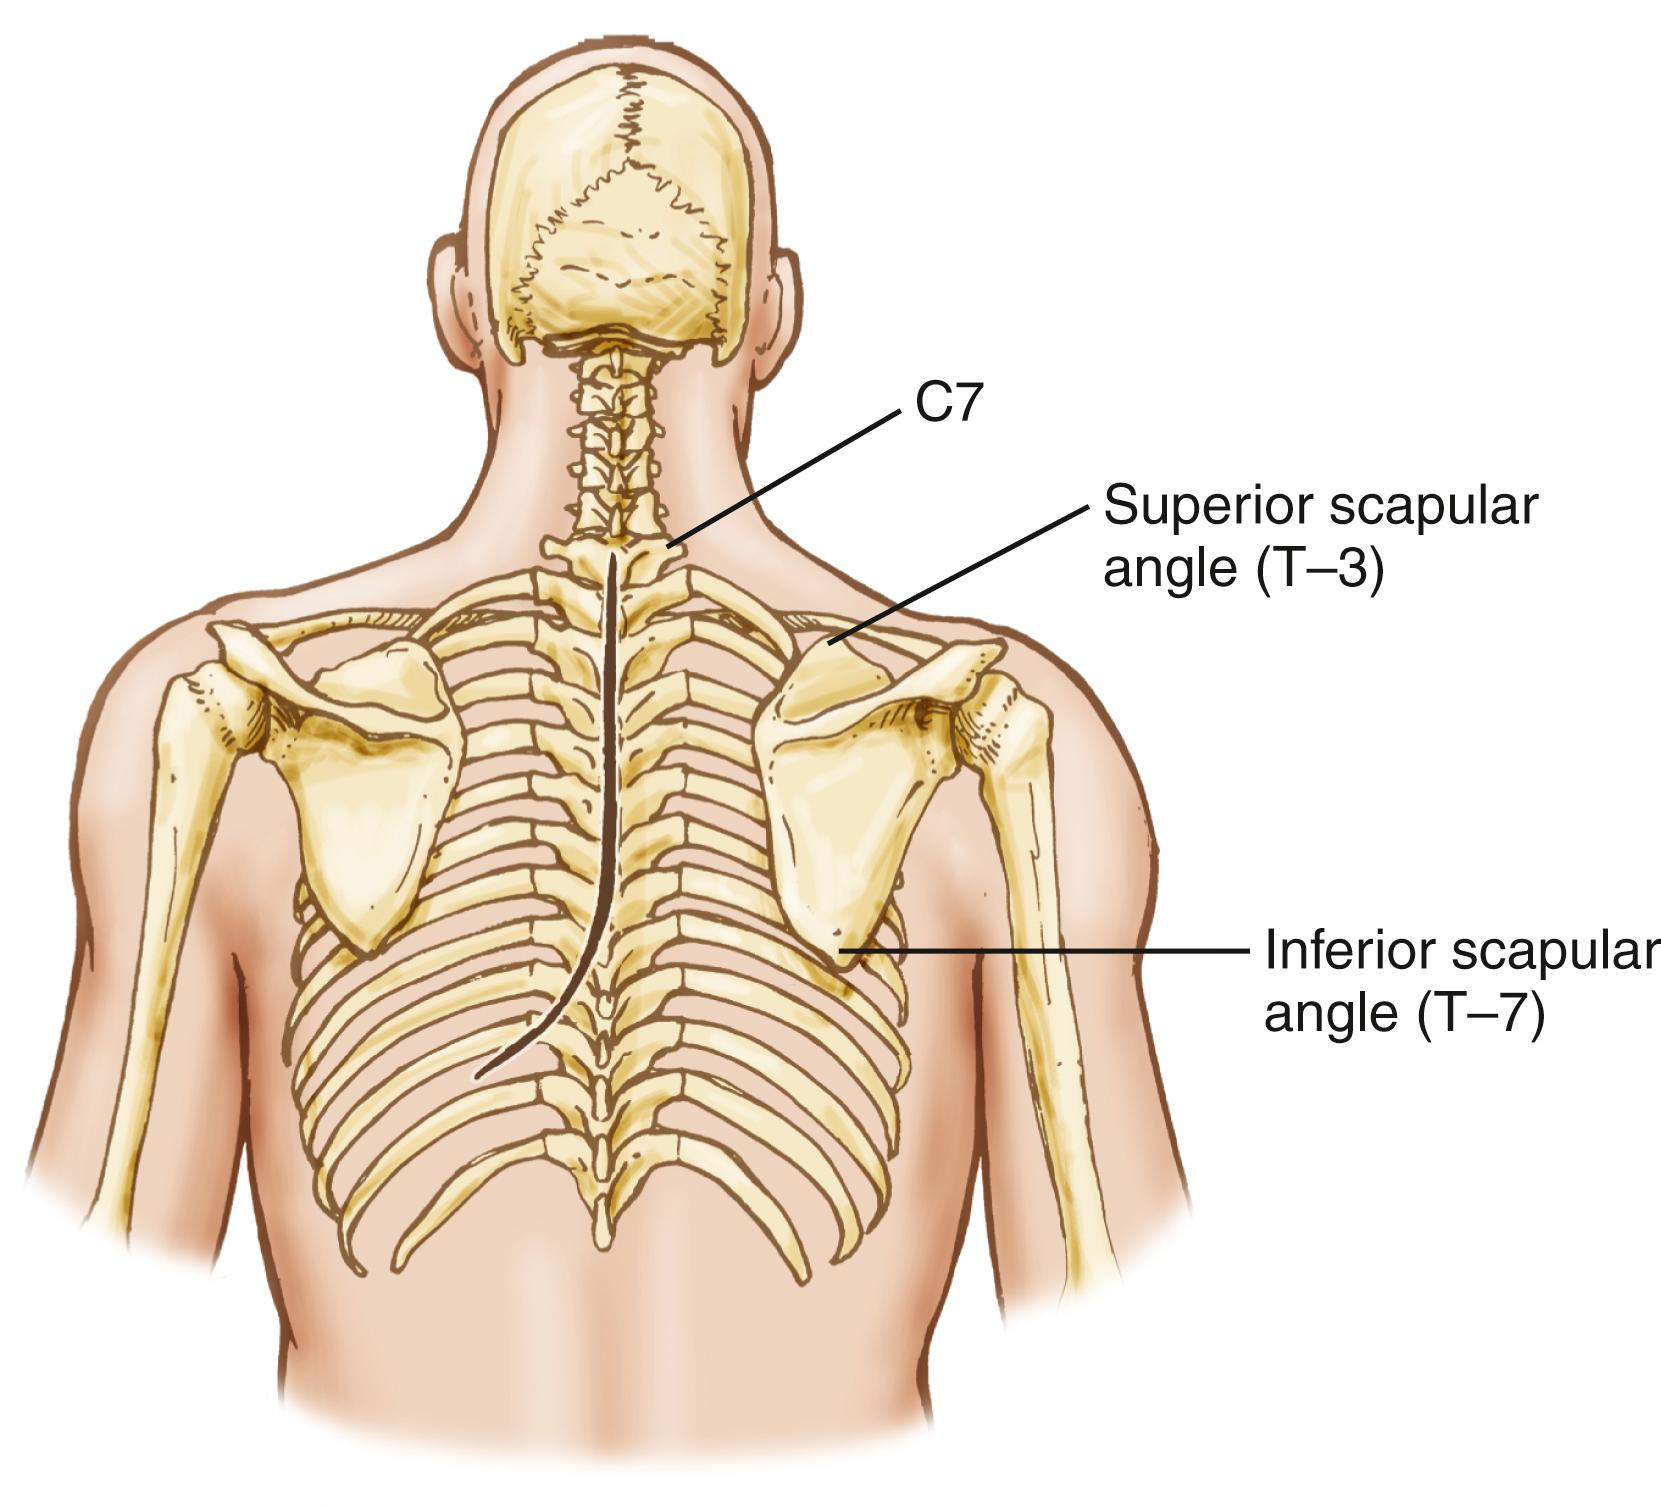 FIGURE 178.1, Relationship of the scapula to the incision, as well as the surgical approach to the cervicothoracic junction, via the lateral parascapular extrapleural approach.